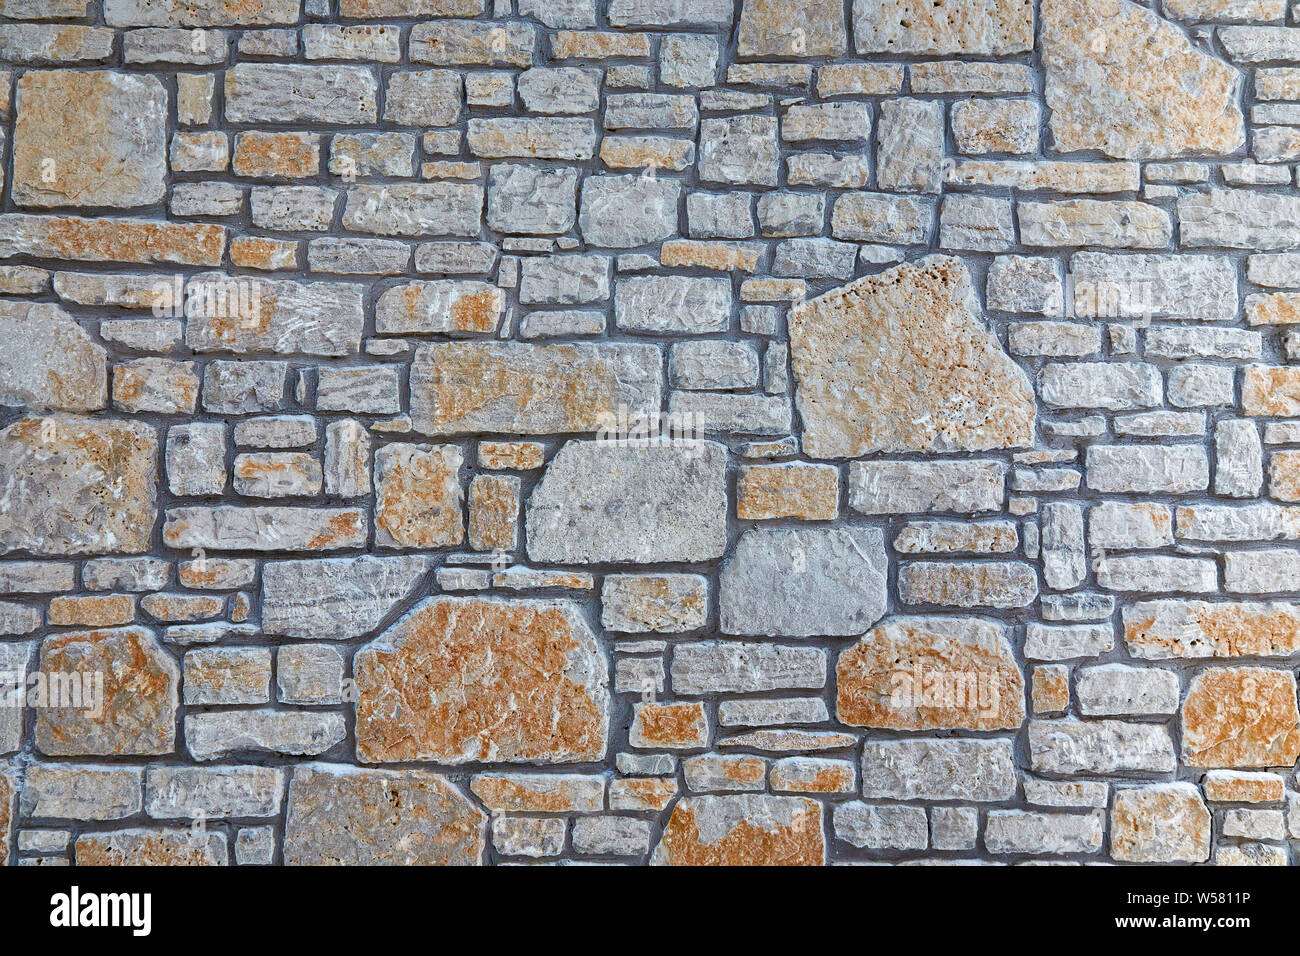 Wall Texture Photos, Download The BEST Free Wall Texture Stock